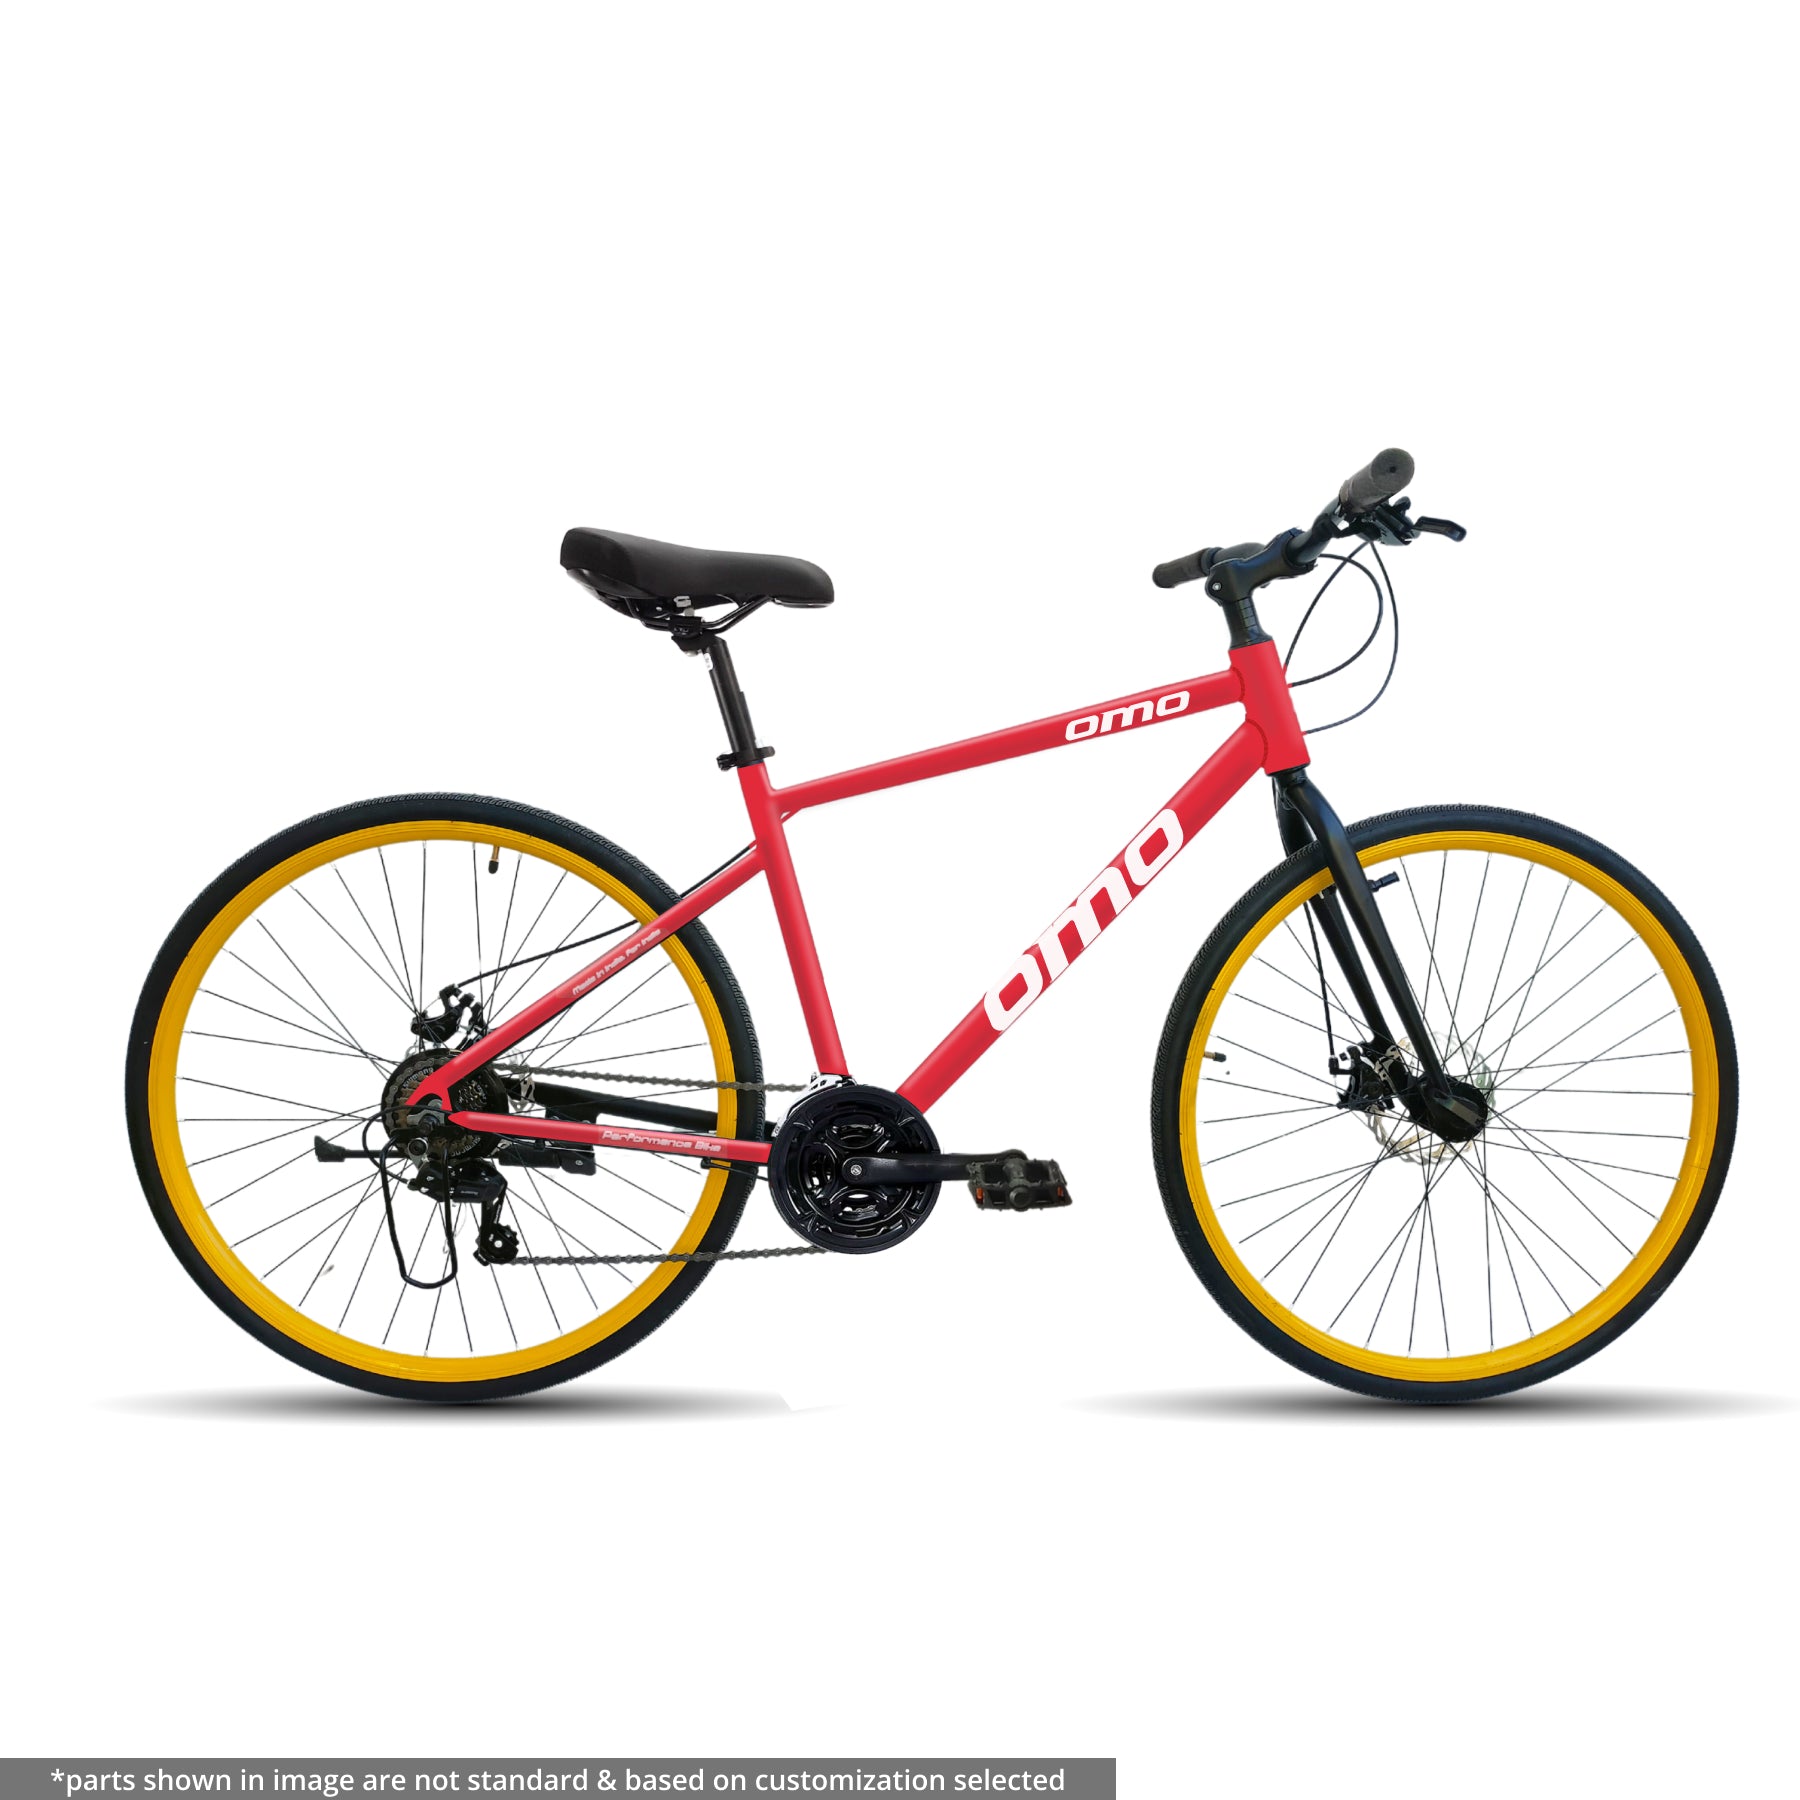 Alloy frame Light weight hybrid bike with 24 gear under 15000 in india by omobikes hampi red color yellow frame